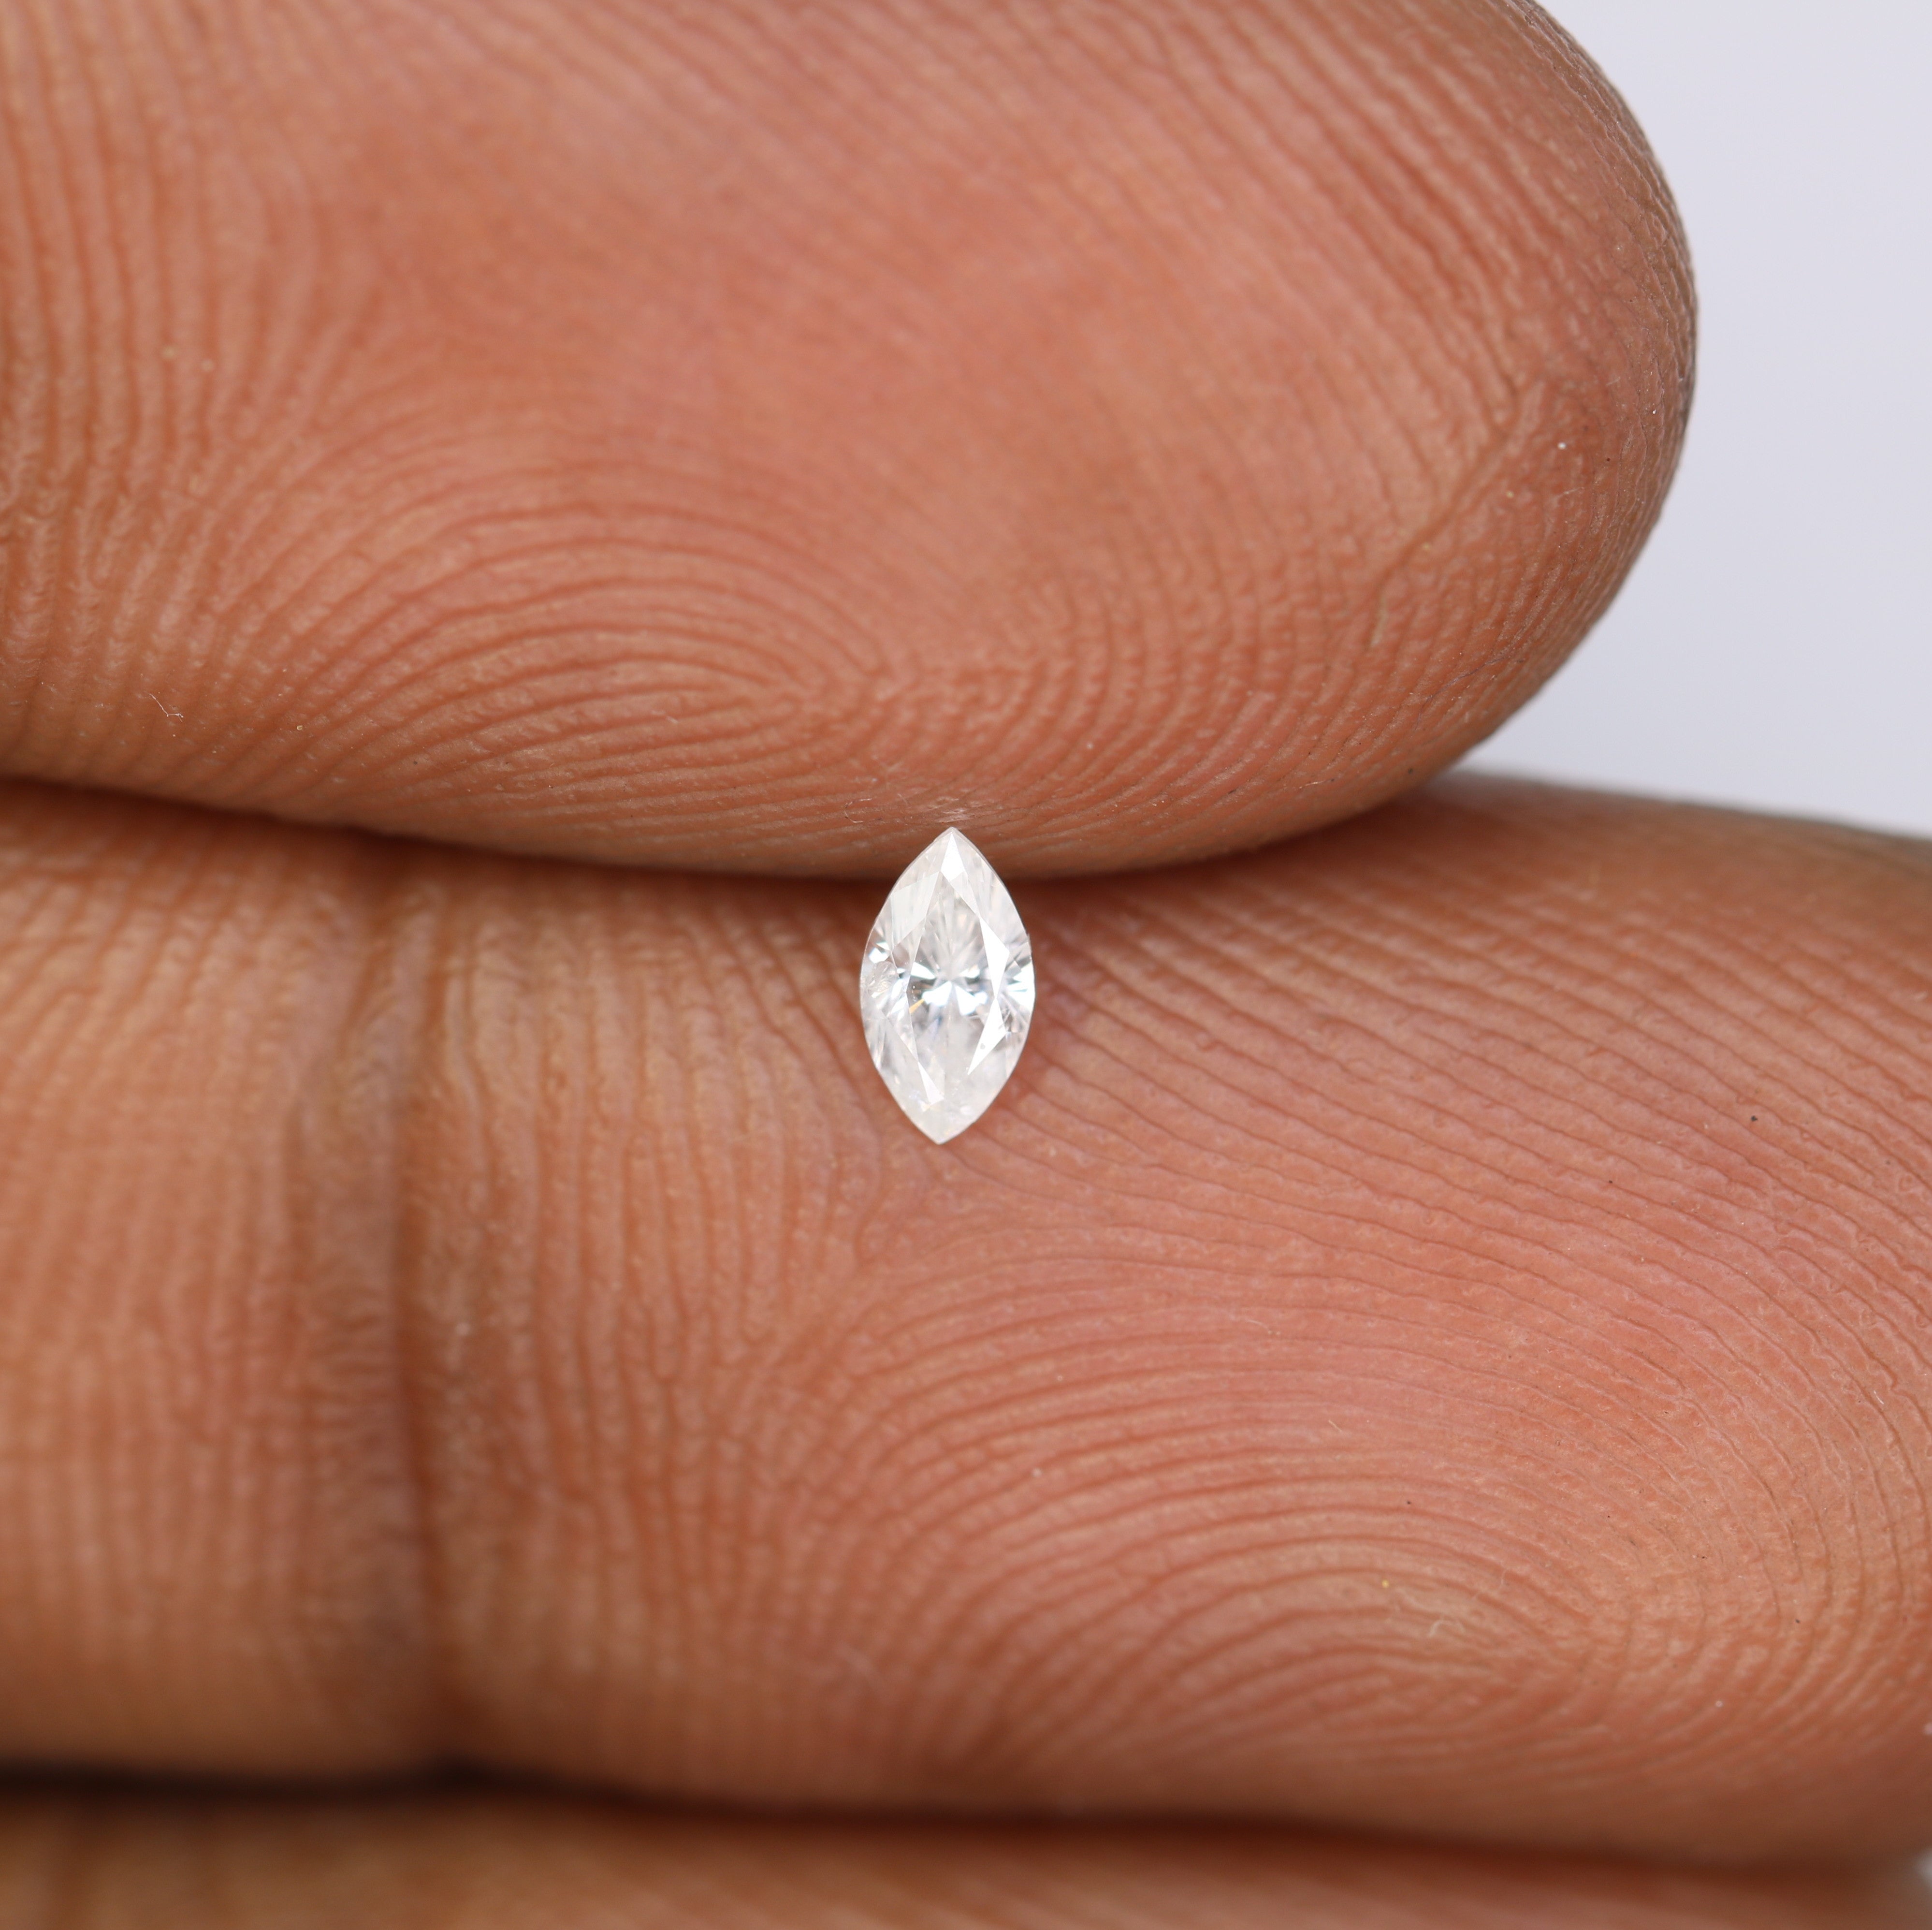 0.14 CT White Marquise Shape Diamond For Engagement Ring